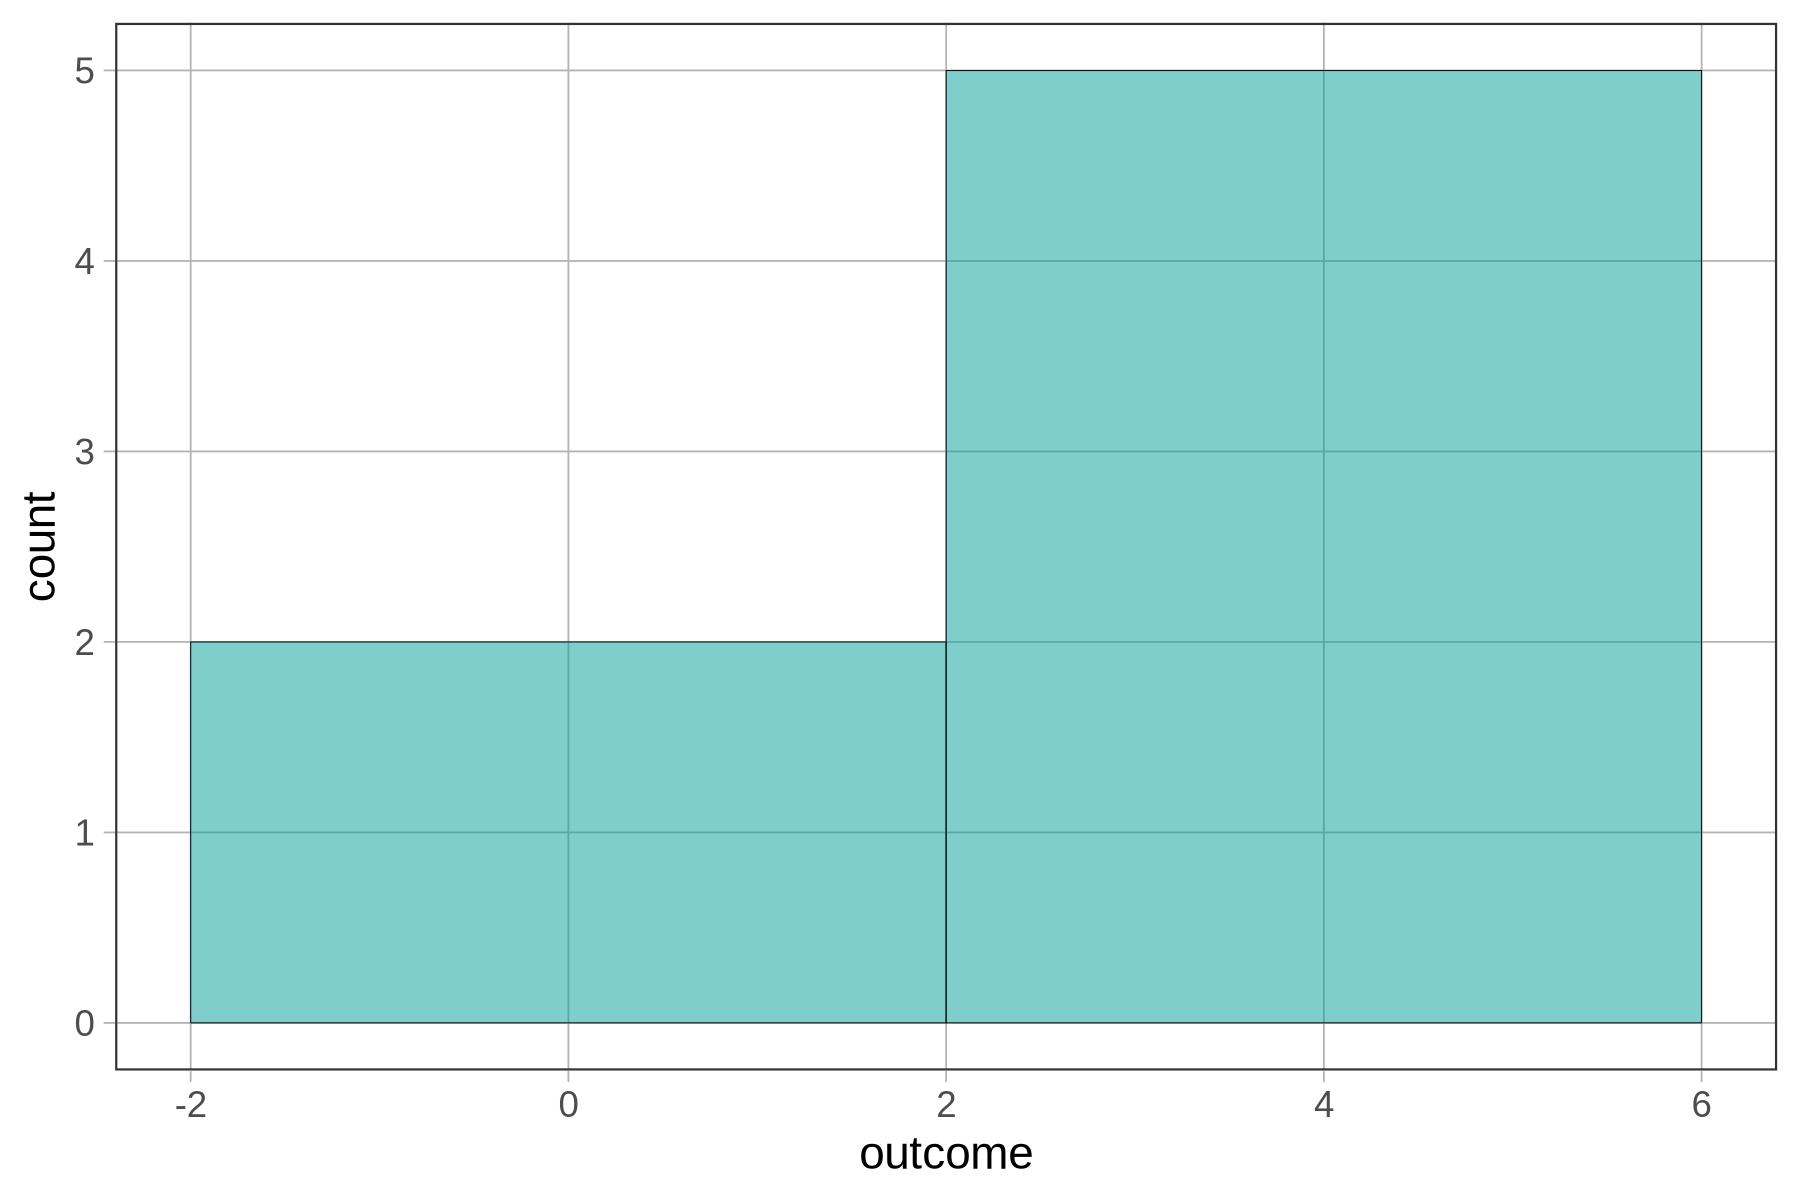 A histogram of the distribution of outcome after we adjust the binwidth. Now we have two bins instead of five. The first bin ranges from -2 to 2, and the second bin ranges from 2 to 6.